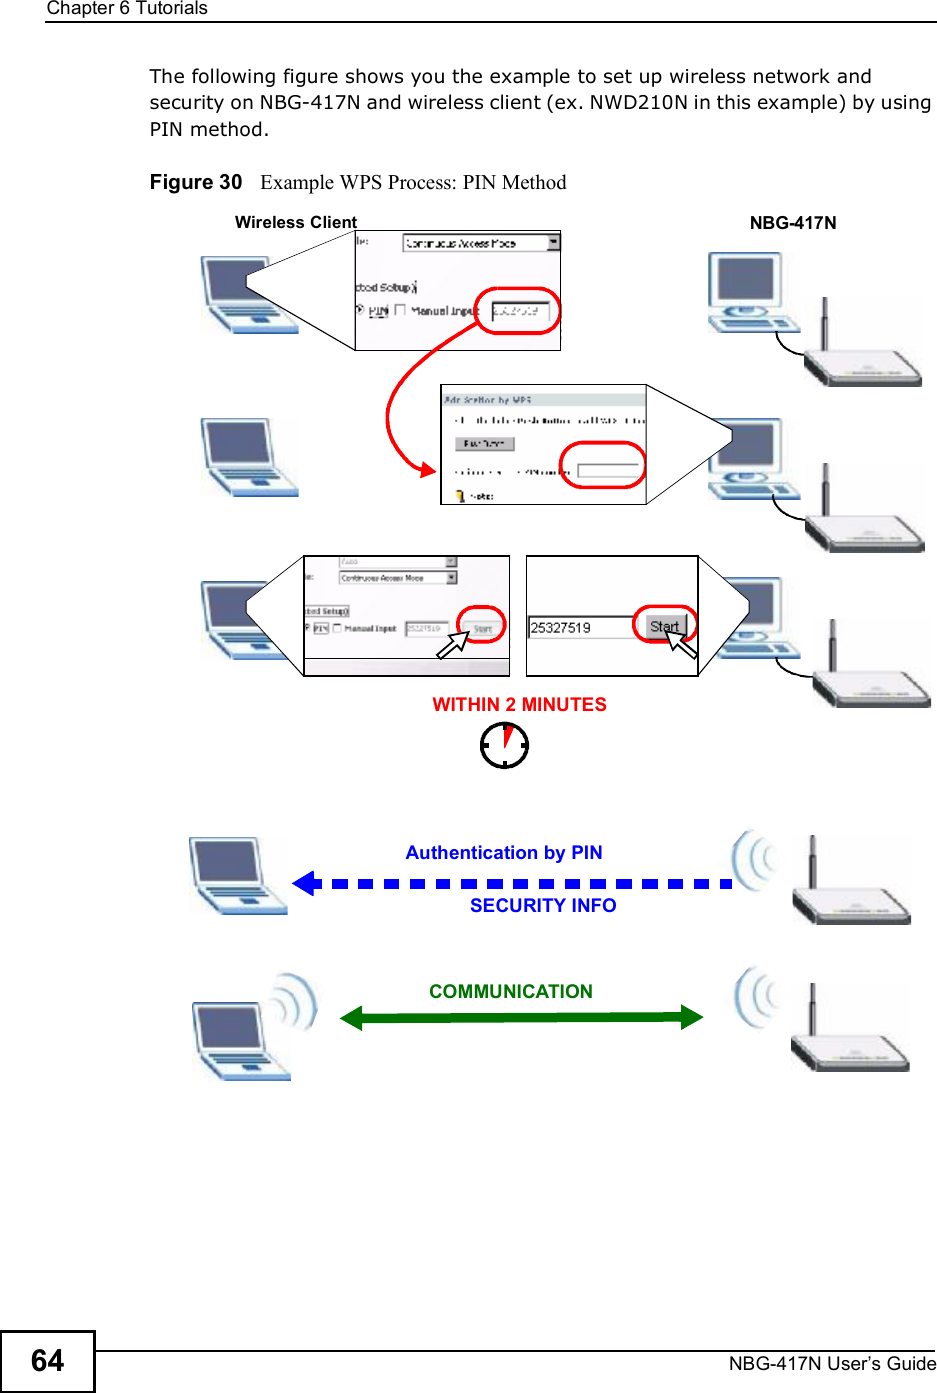 Chapter 6TutorialsNBG-417N User s Guide64The following figure shows you the example to set up wireless network and security on NBG-417N and wireless client (ex. NWD210N in this example) by using PIN method. Figure 30   Example WPS Process: PIN MethodAuthentication by PINSECURITY INFOWITHIN 2 MINUTESWireless Client NBG-417NCOMMUNICATION